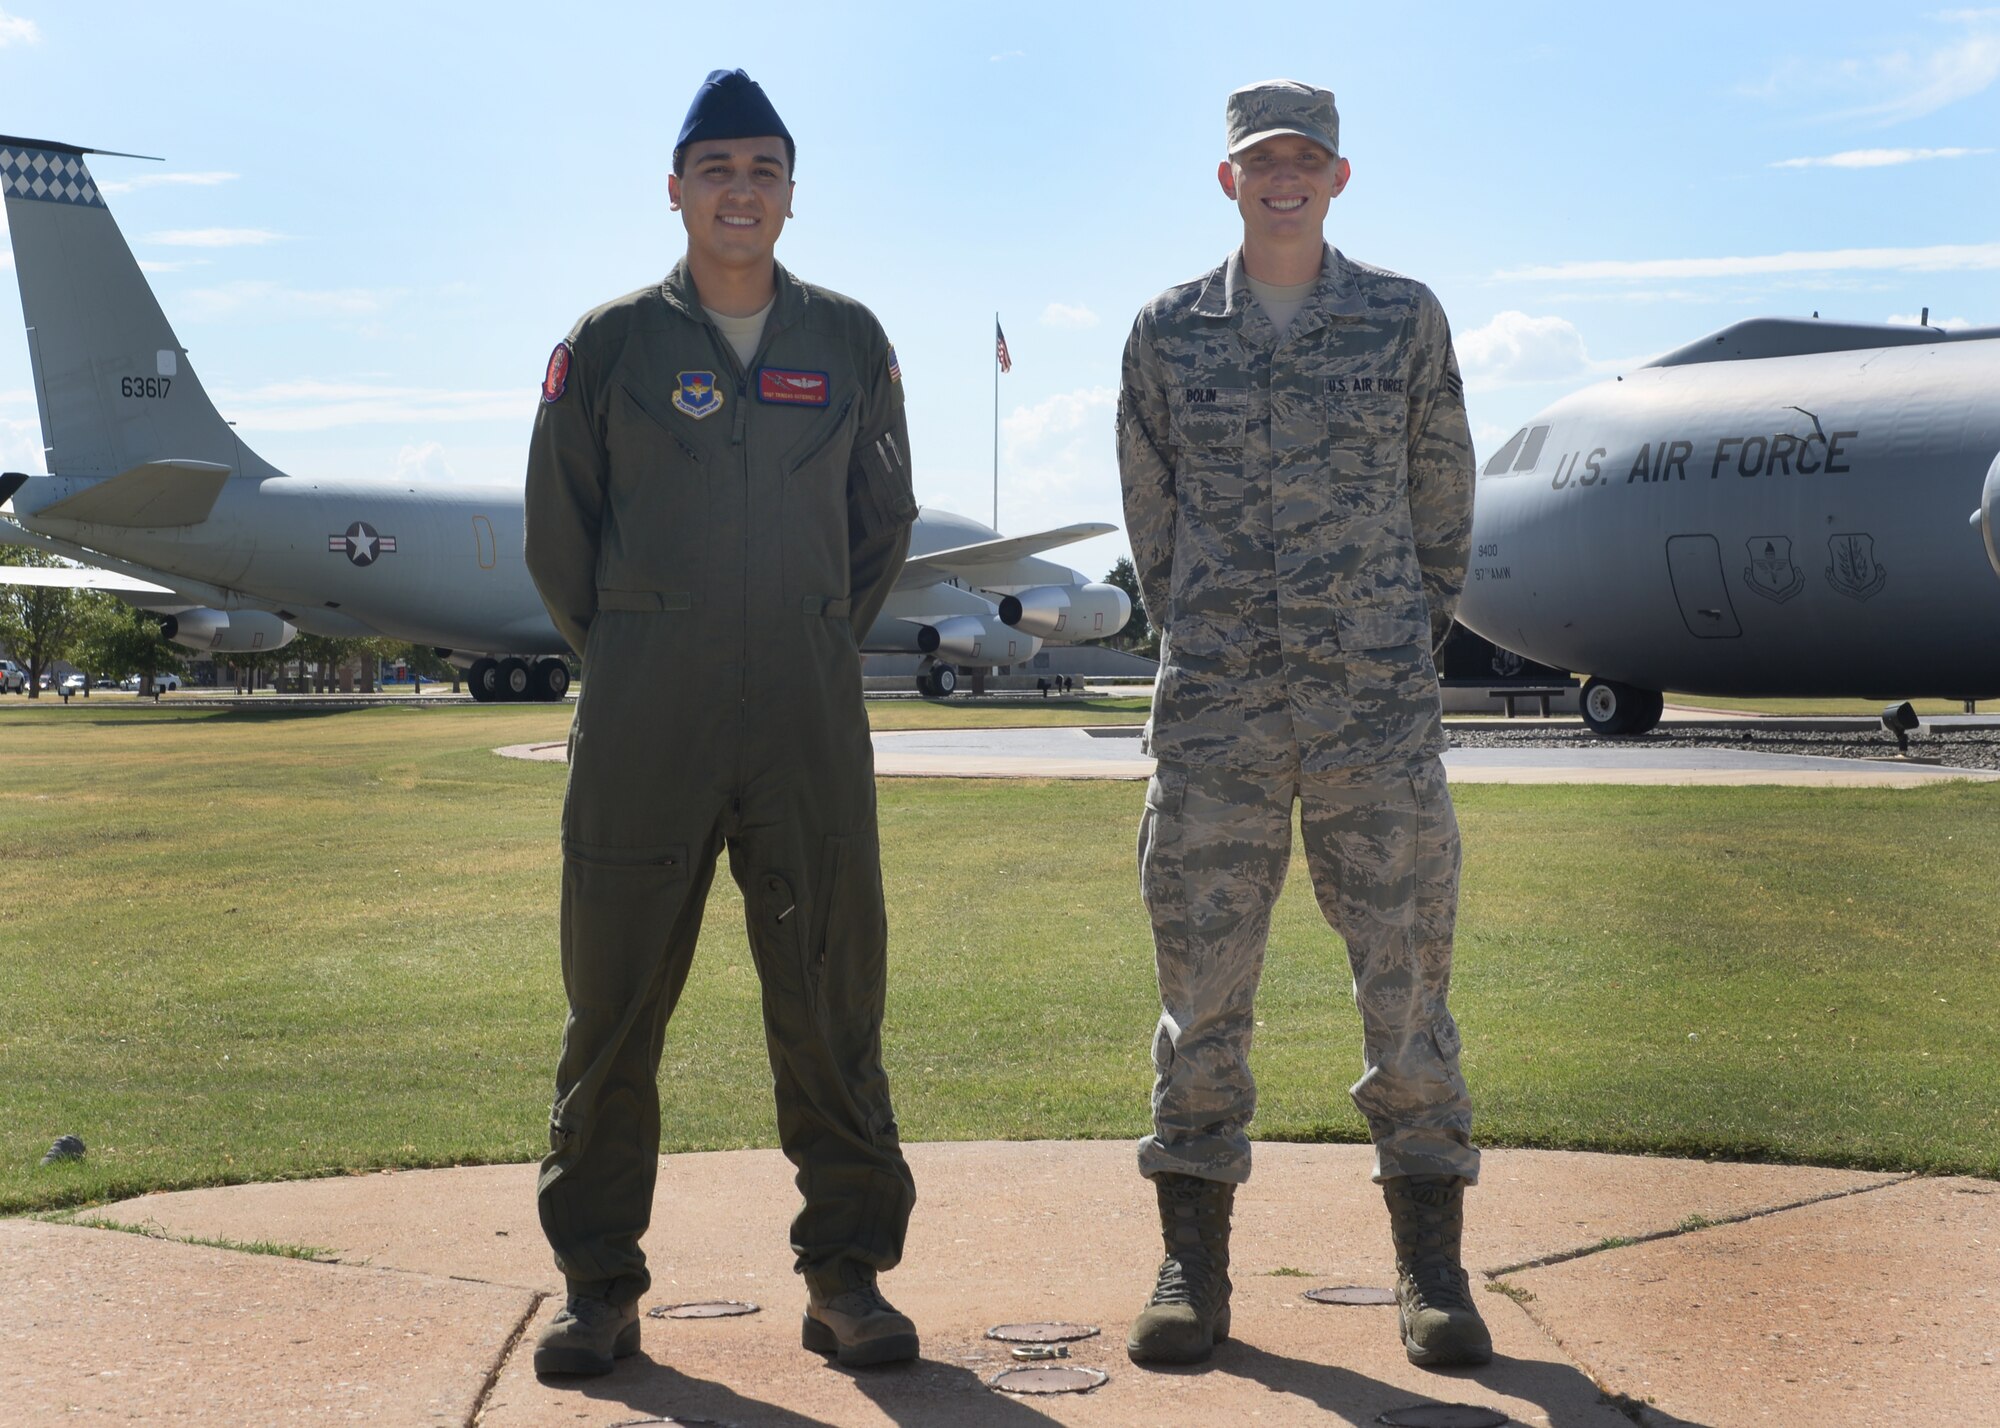 Staff Sgt. Trinidad Gutierrez, left, an instructor loadmaster with the 58th Airlift Squadron, and U.S. Air Force Senior Airman Bart Bolin, bioenvironmental engineering technician with 97th Medical Operations Squadron, stand together at Wings of Freedom Park, Aug. 25, 2014. Gutierrez and Bolin plan to run in the Air Force Marathon Sept. 20. (U.S. Air Force photo by Airman 1st Class Nathan Clark)